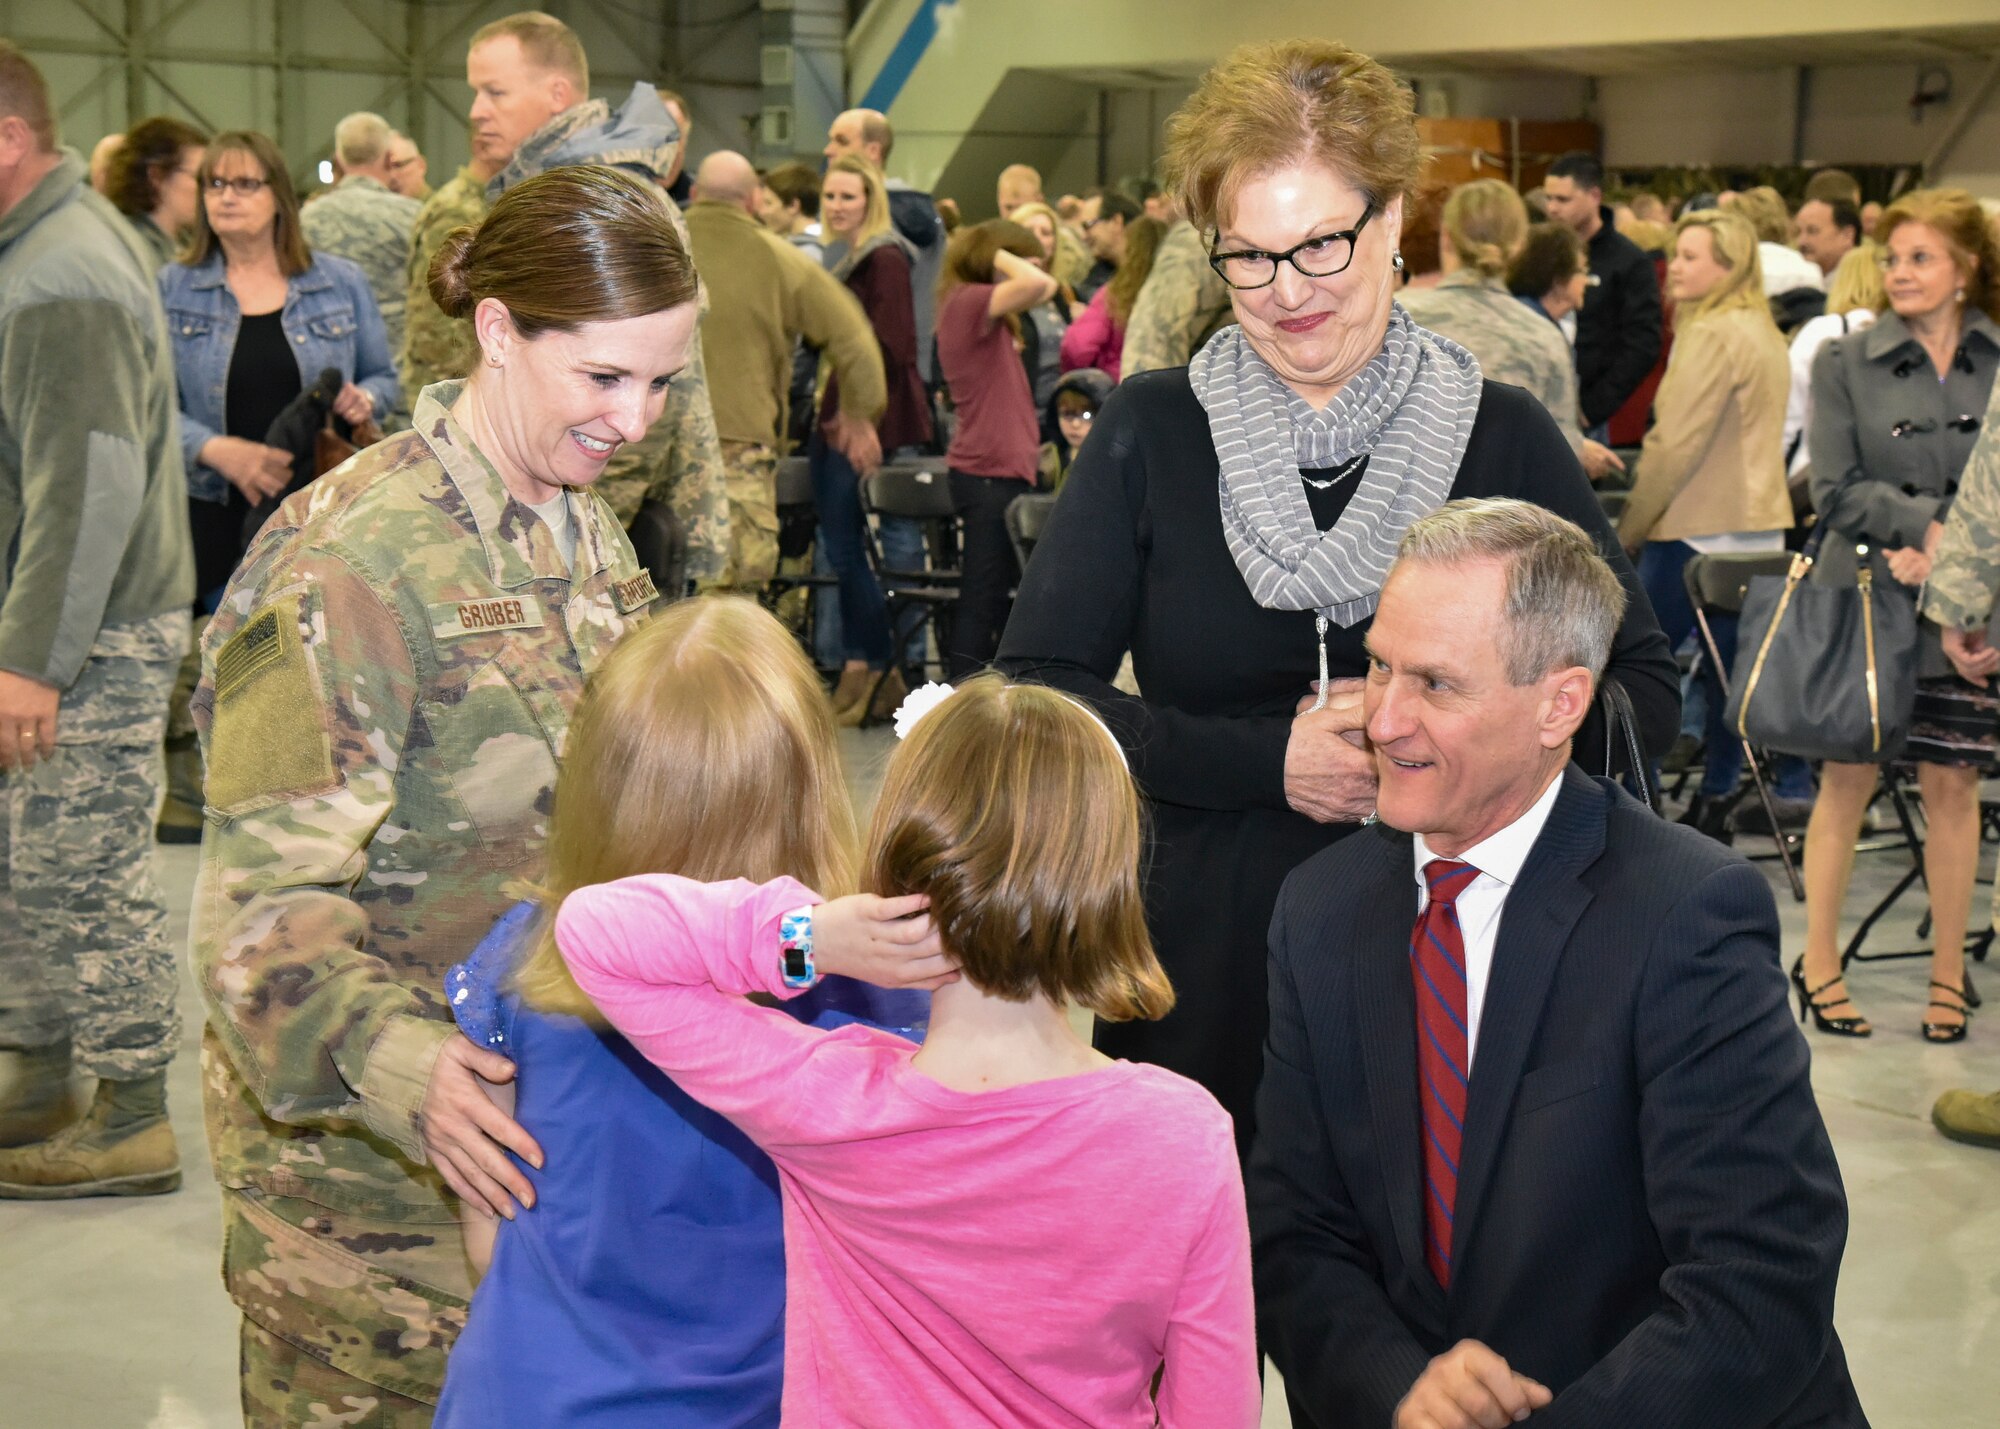 Master Sgt. Nichole Gruber, 114th Civil Engineer Squadron first sergeant, and her family visits with South Dakota Governor Dennis Daugaard and First Lady Linda during a welcome home ceremony March 4, 2018 at Joe Foss Field.